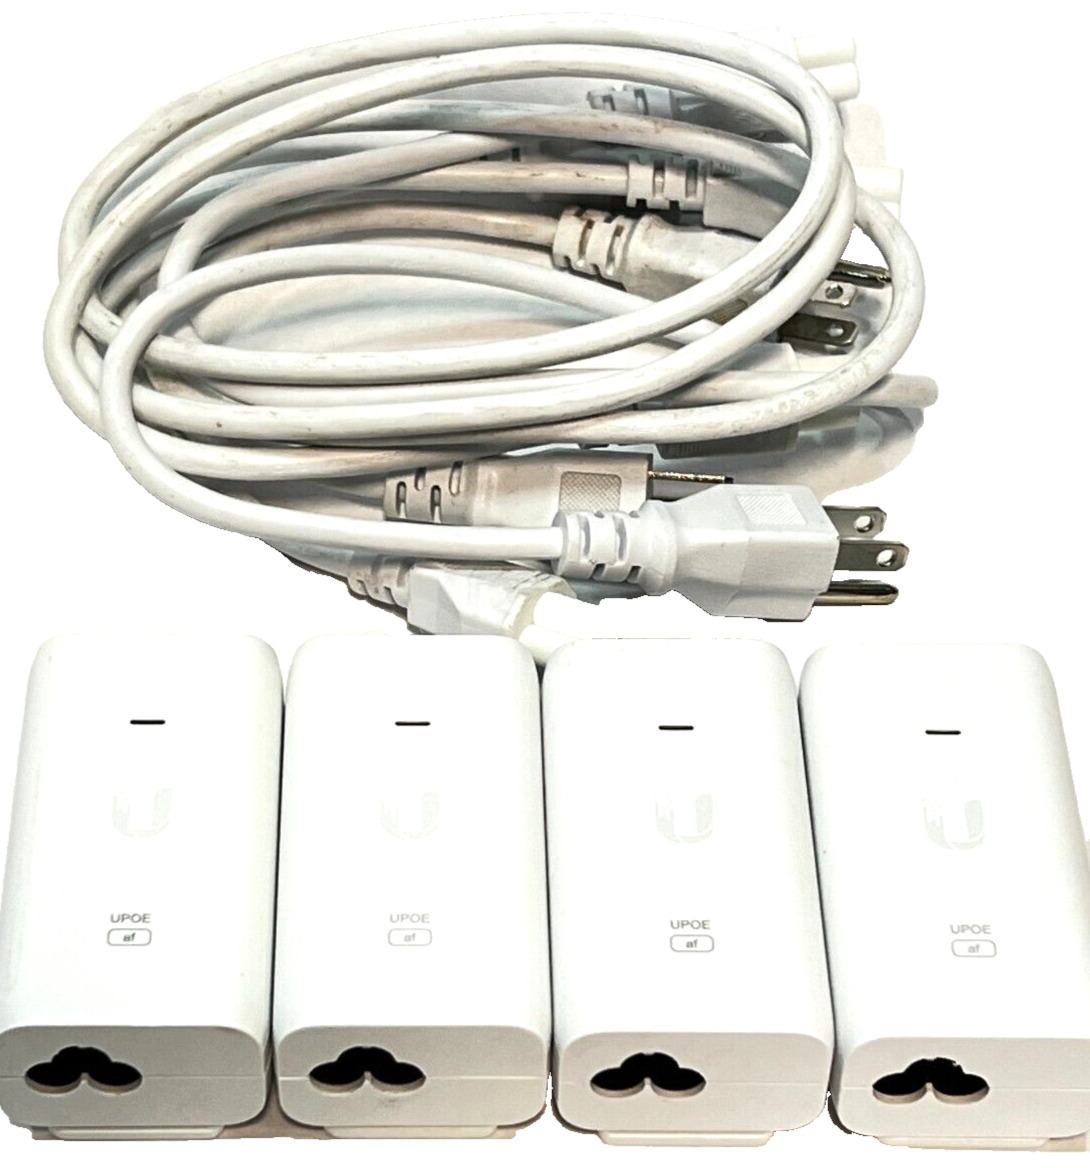 Lot of 4 - Ubiquiti UniFi PoE Injector U-POE-af with Power Cord, Bases